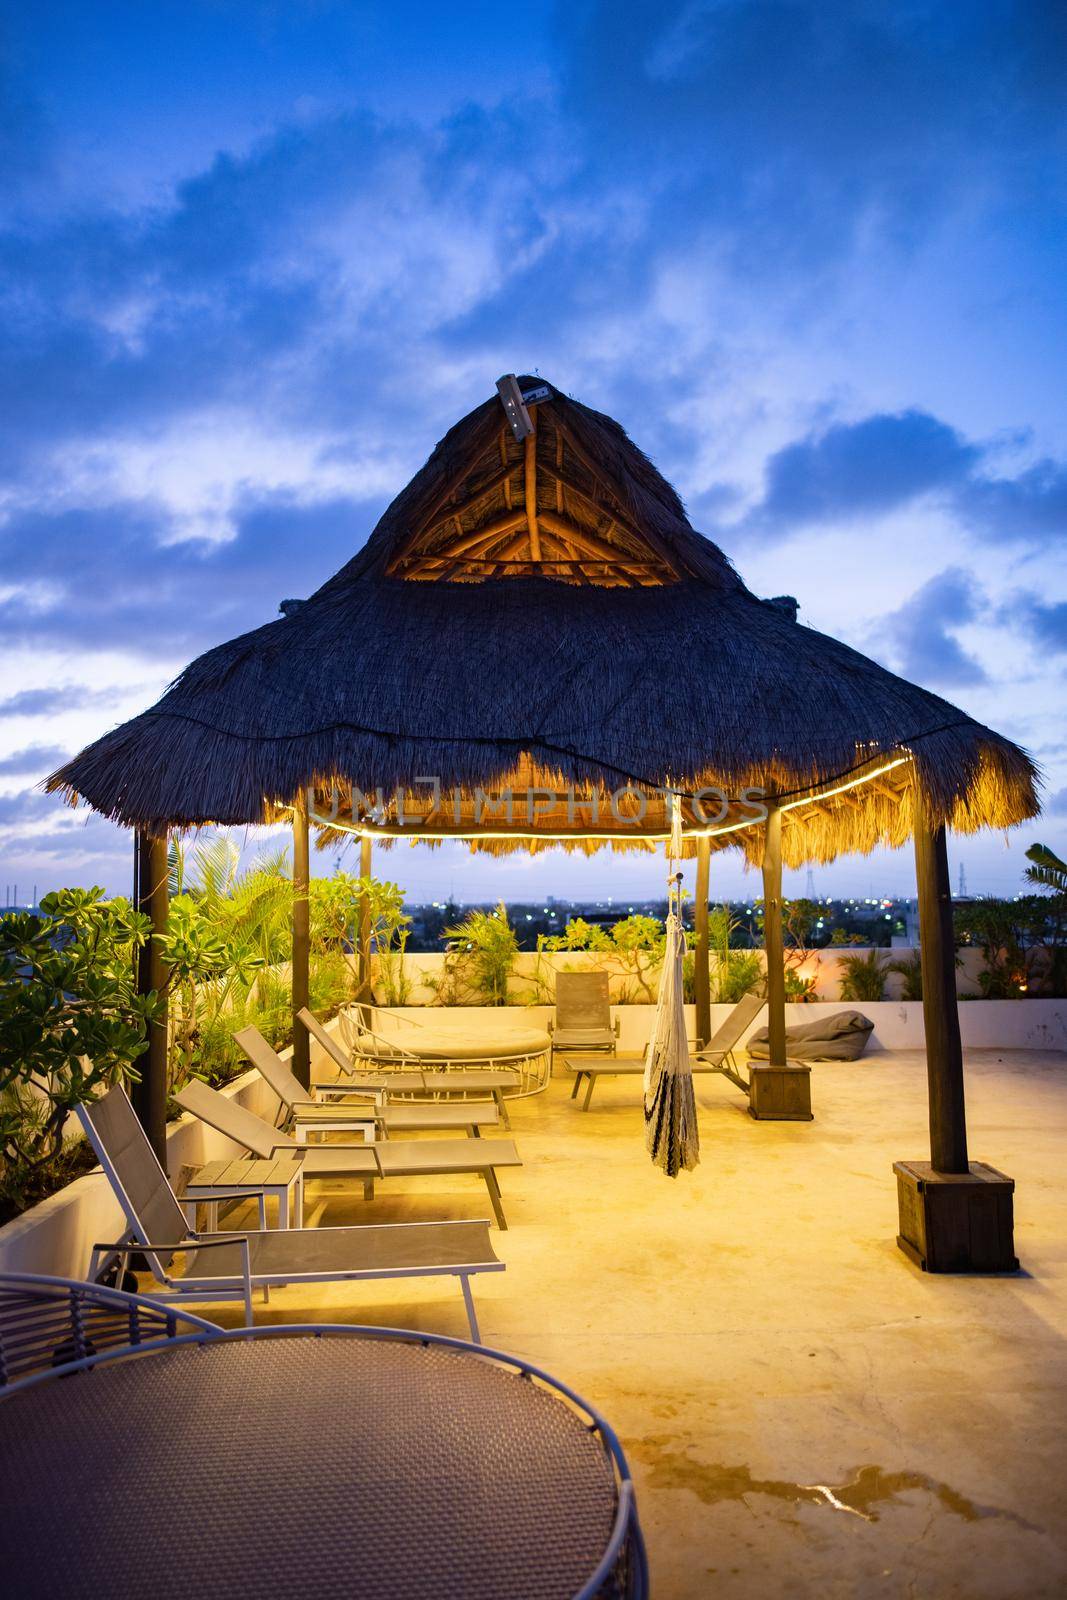 Astonishing view of beach beds and lighted palm pergola on hotel rooftop under beautiful dark blue sky. Peaceful dusk skyline above building with tropical plants and seats. Holiday landscapes